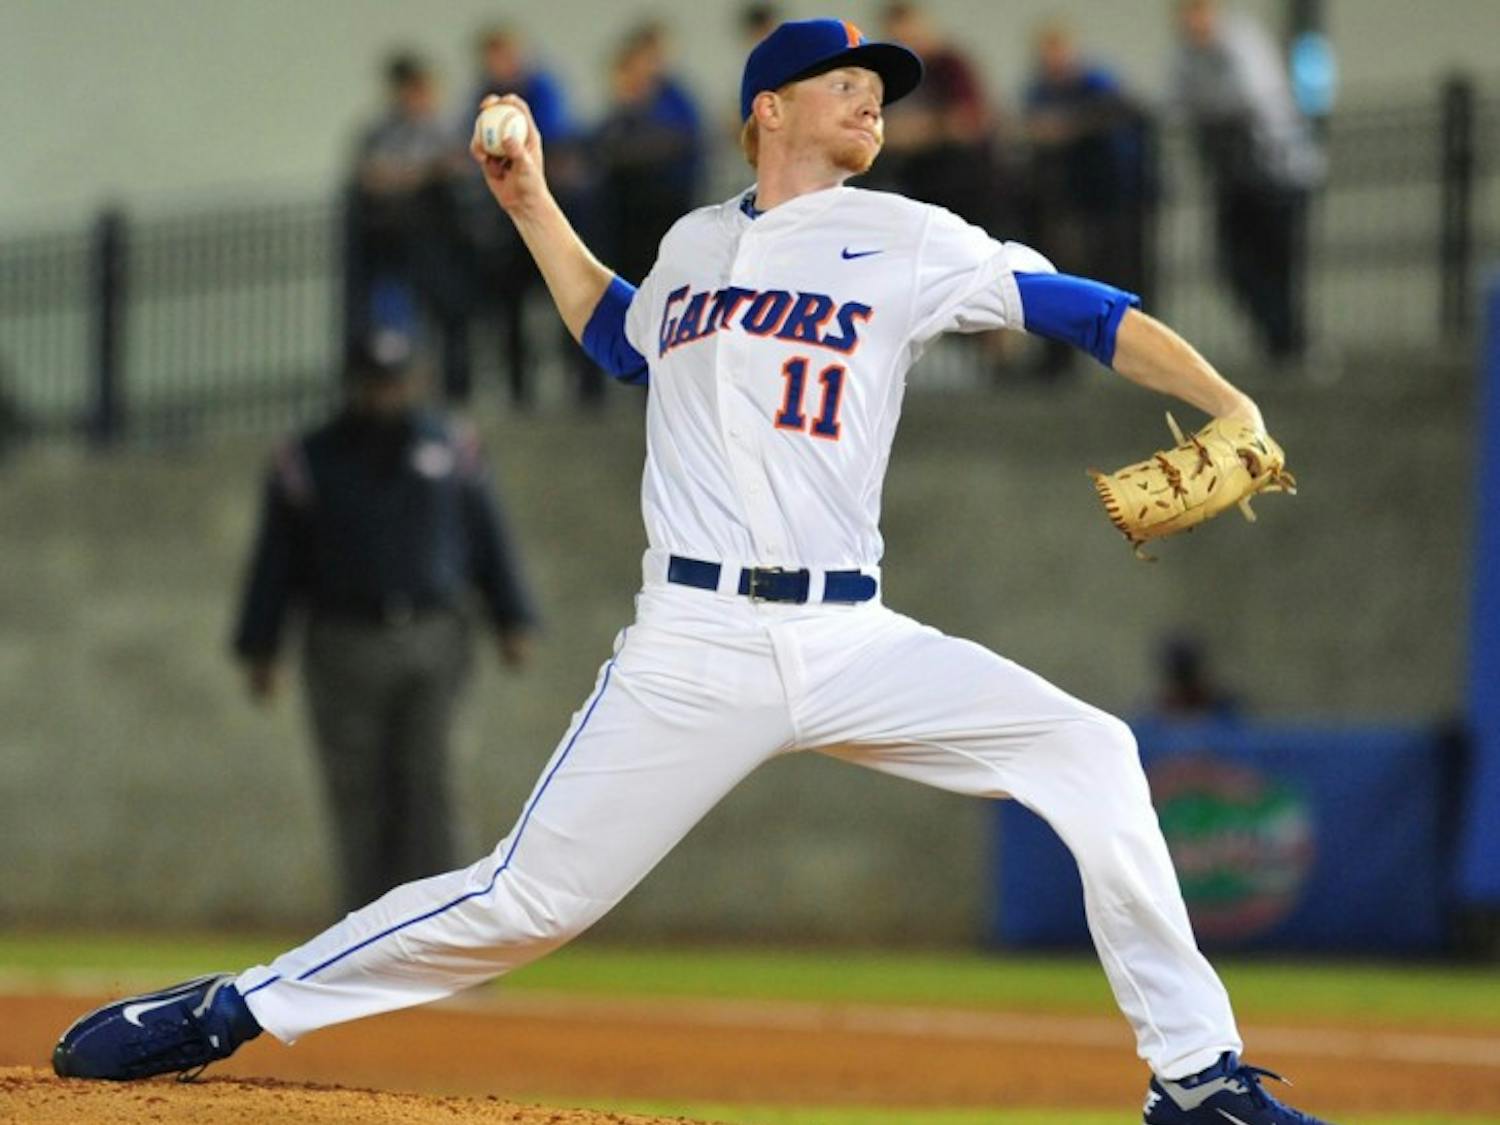 Florida junior starting pitcher Hudson Randall said he enjoys strength coach Paul Chandler’s pool exercises, adding that the resistance has helped him tremendously.